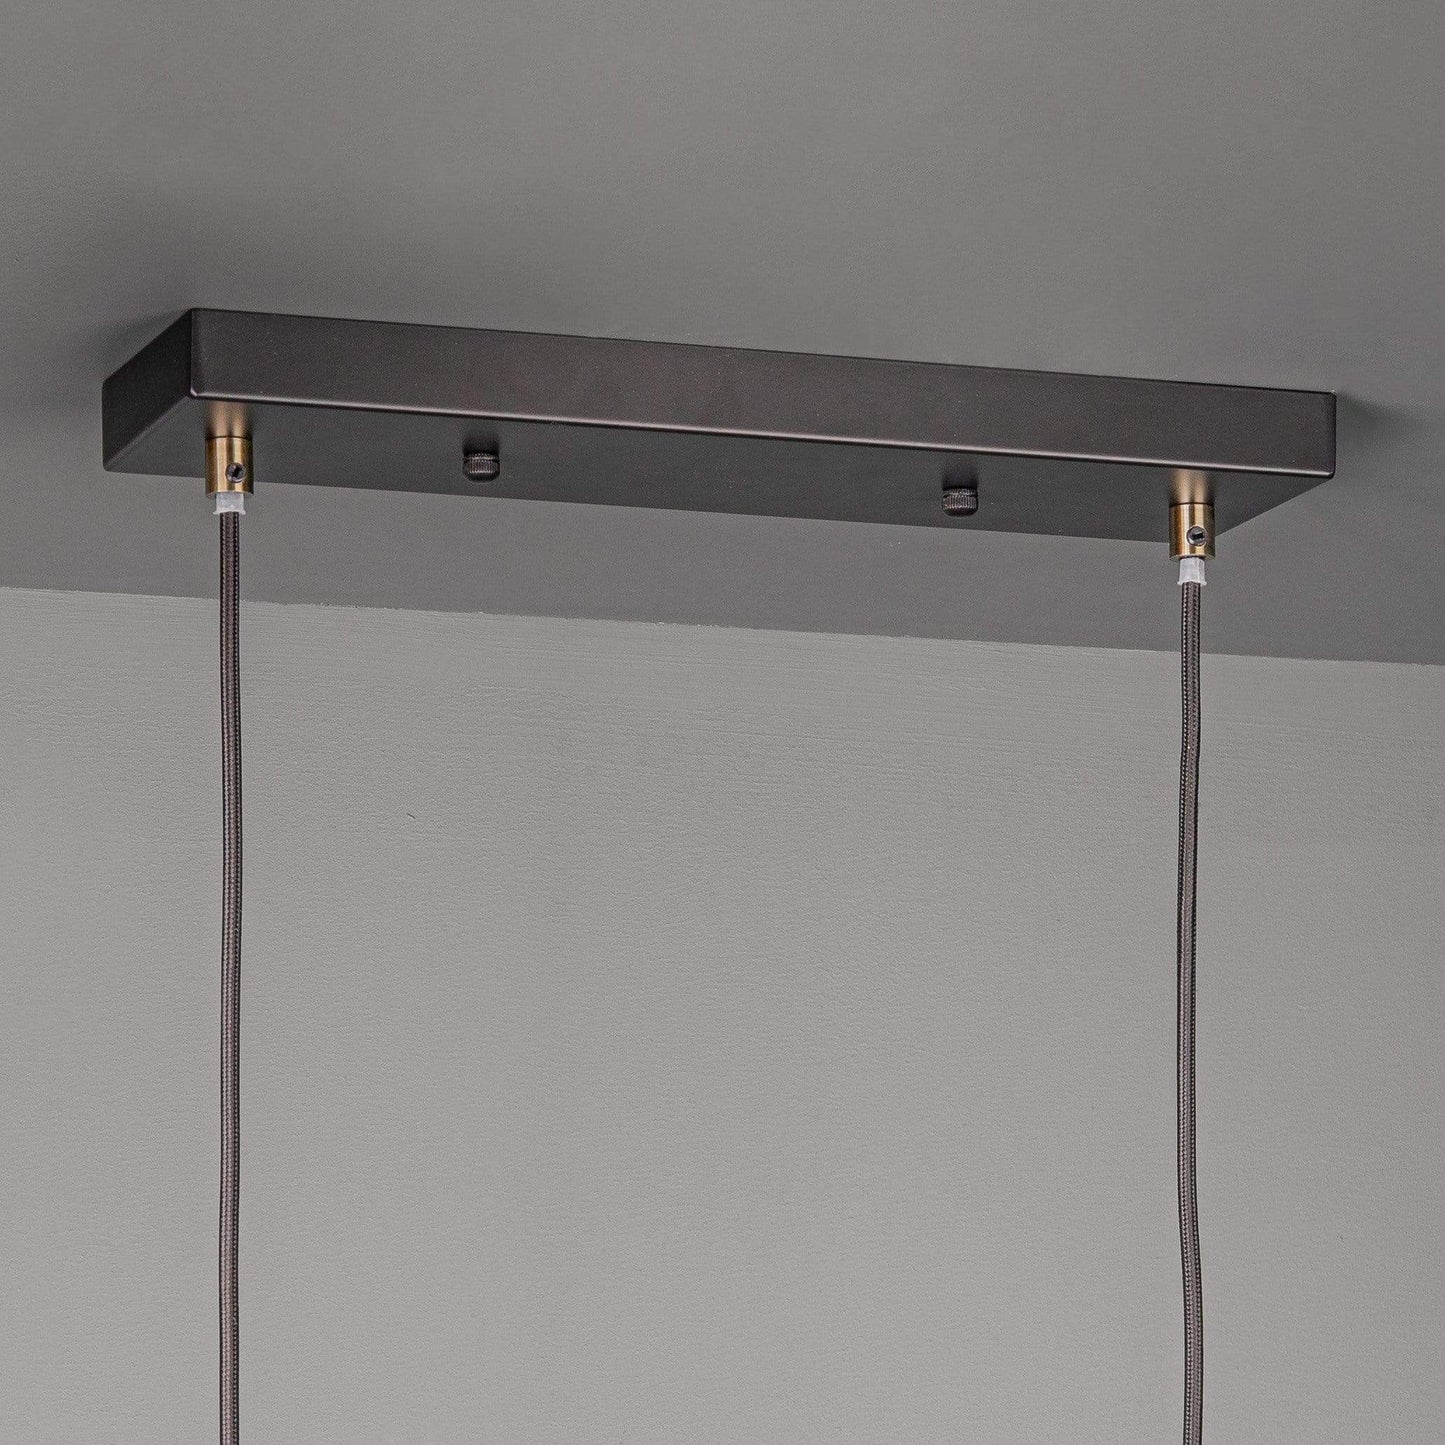 Lights  -  3 Light Bar In Antique Brass With Glass Shade Ceiling Light  -  50155802